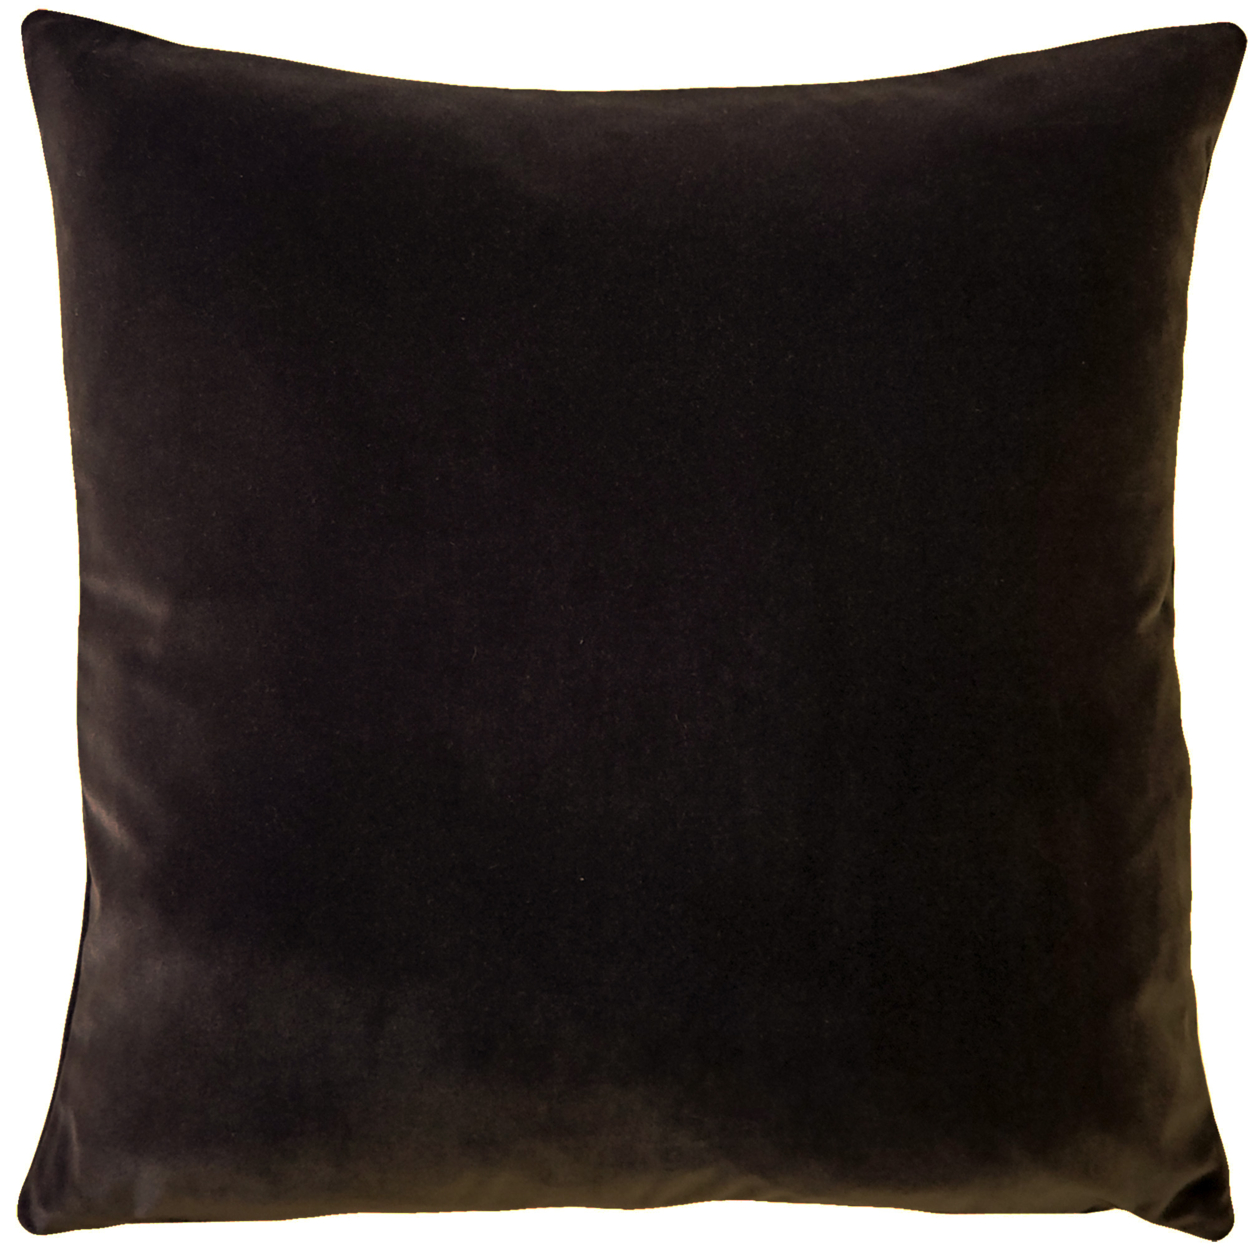 Castello Velvet Throw Pillows, Complete Pillow With Polyfill Pillow Insert (18 Colors, 3 Sizes) - Graphite Gray, 20x20